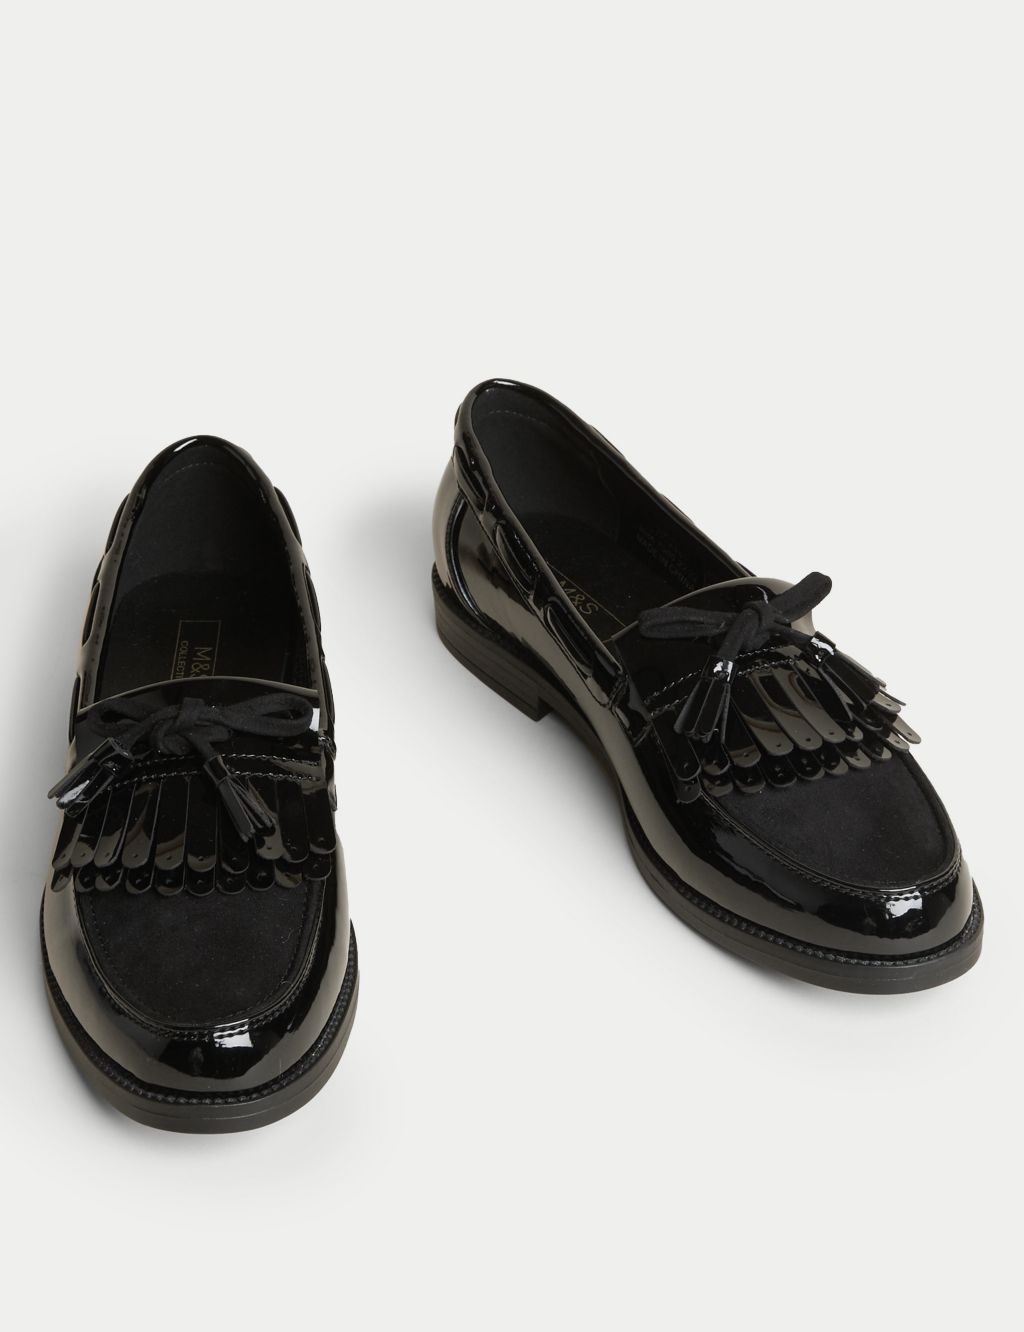 Women’s Loafers | M&S